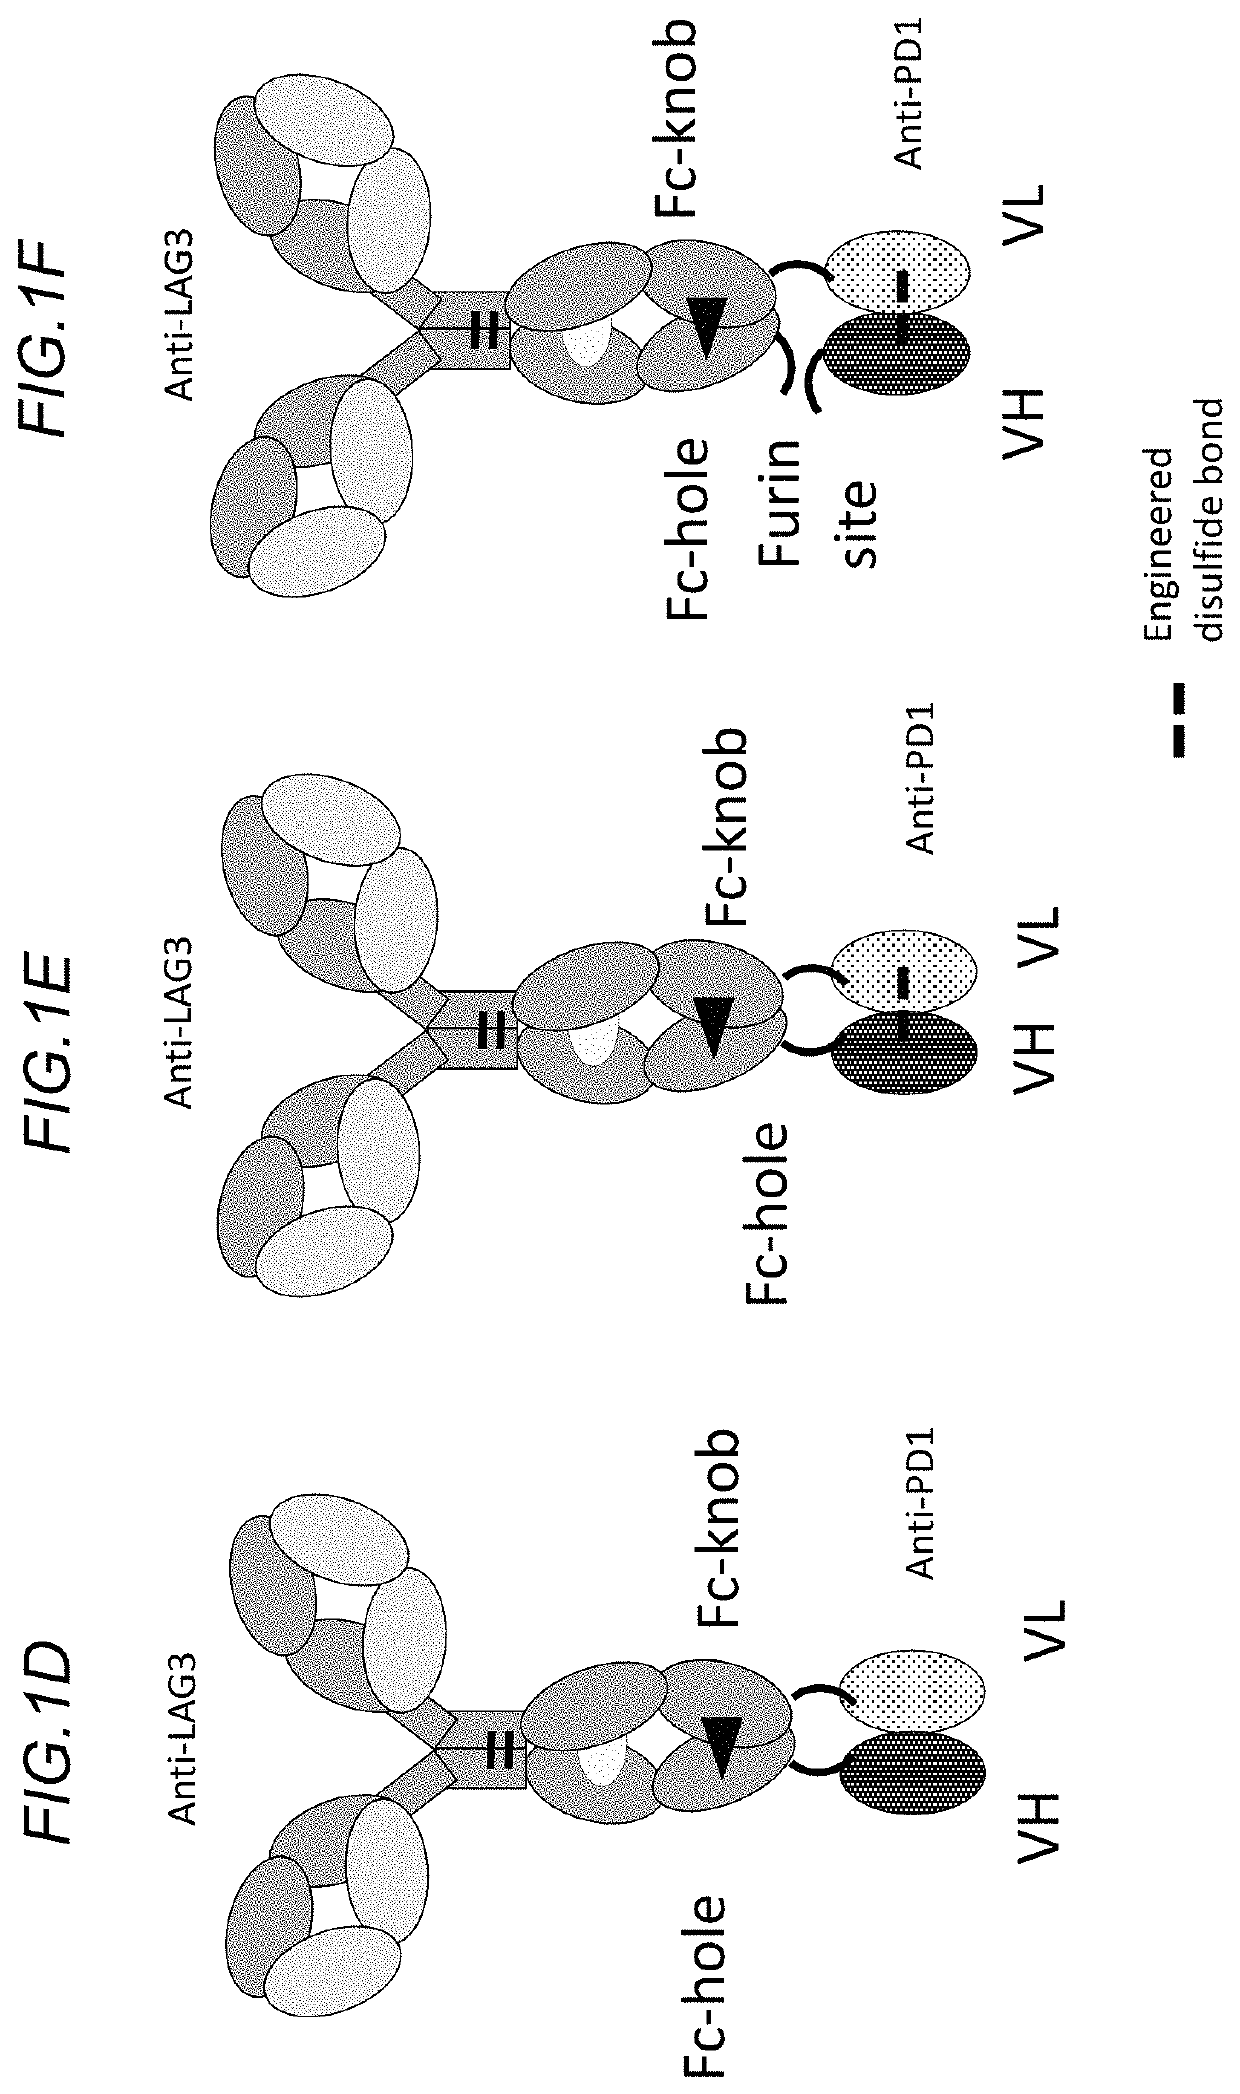 Bispecific antibodies specifically binding to PD1 and LAG3